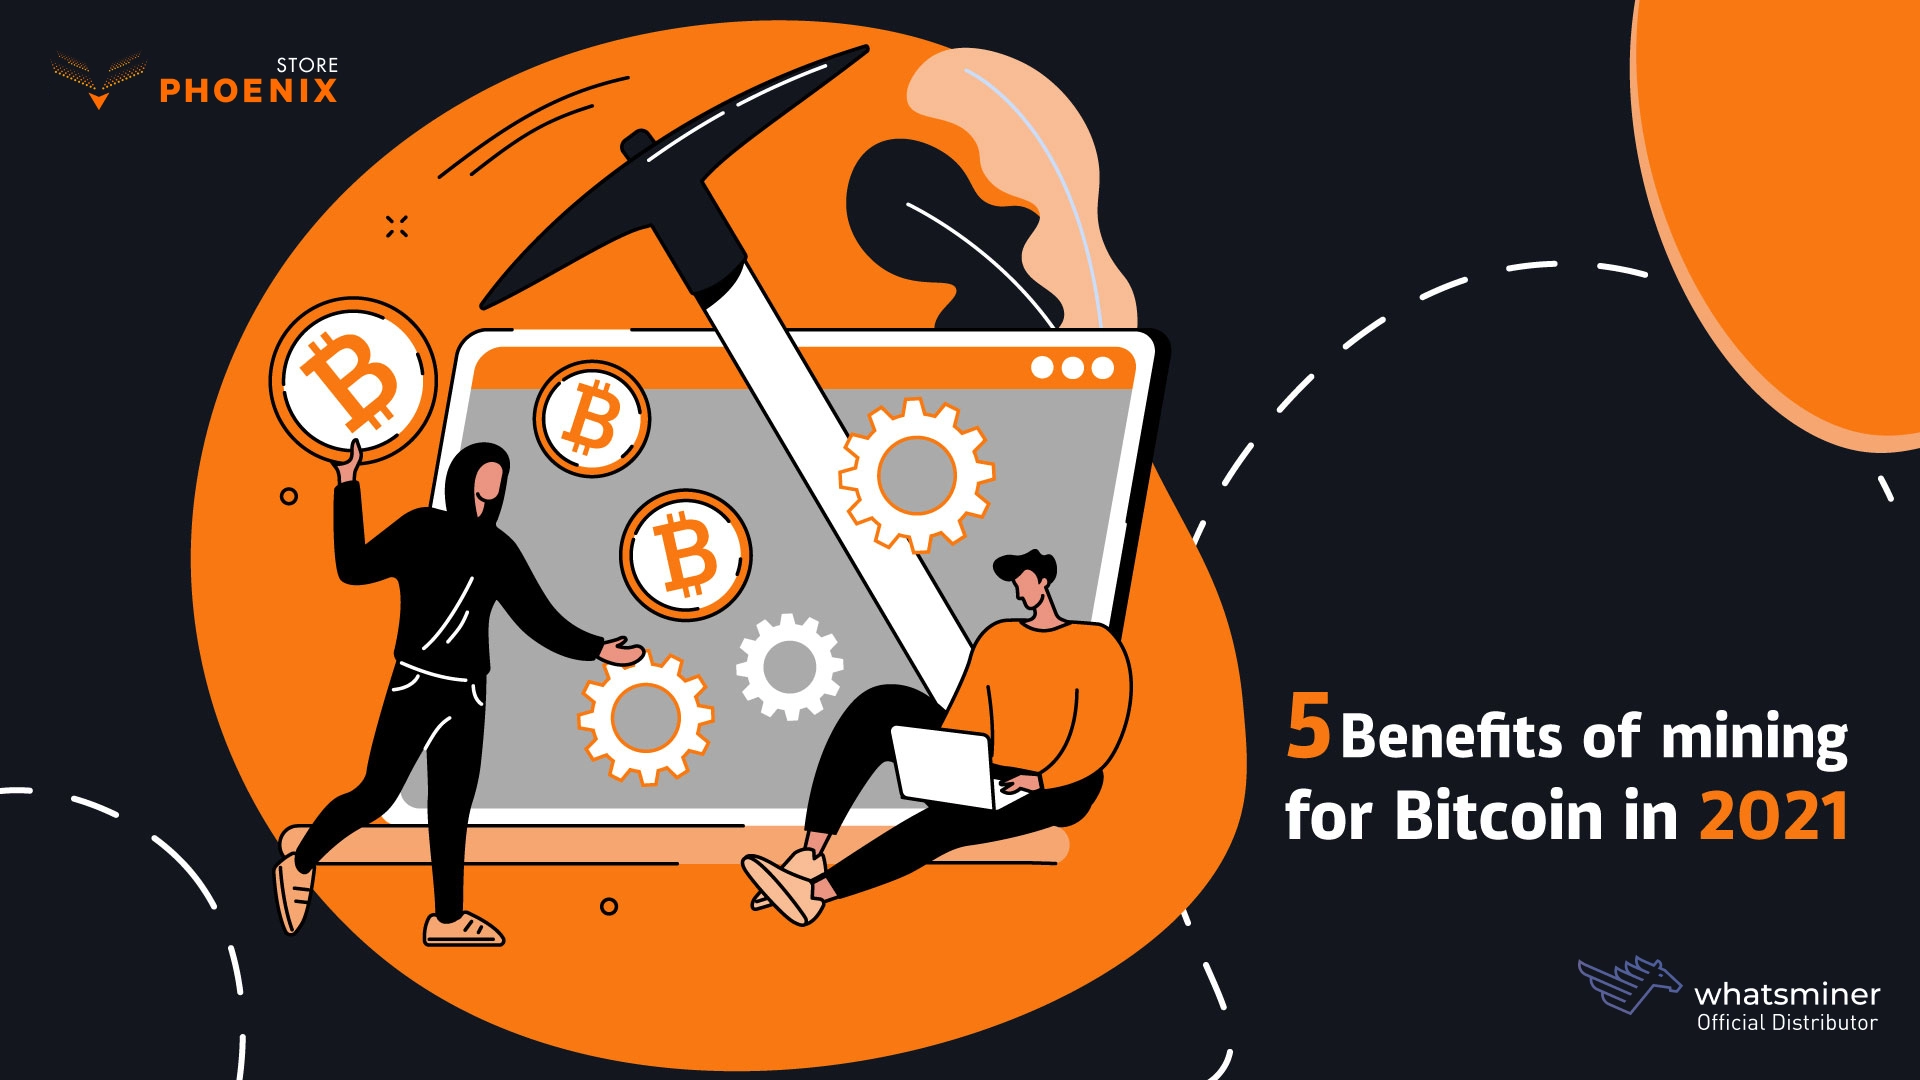 5 Benefits of mining for Bitcoin in 2021